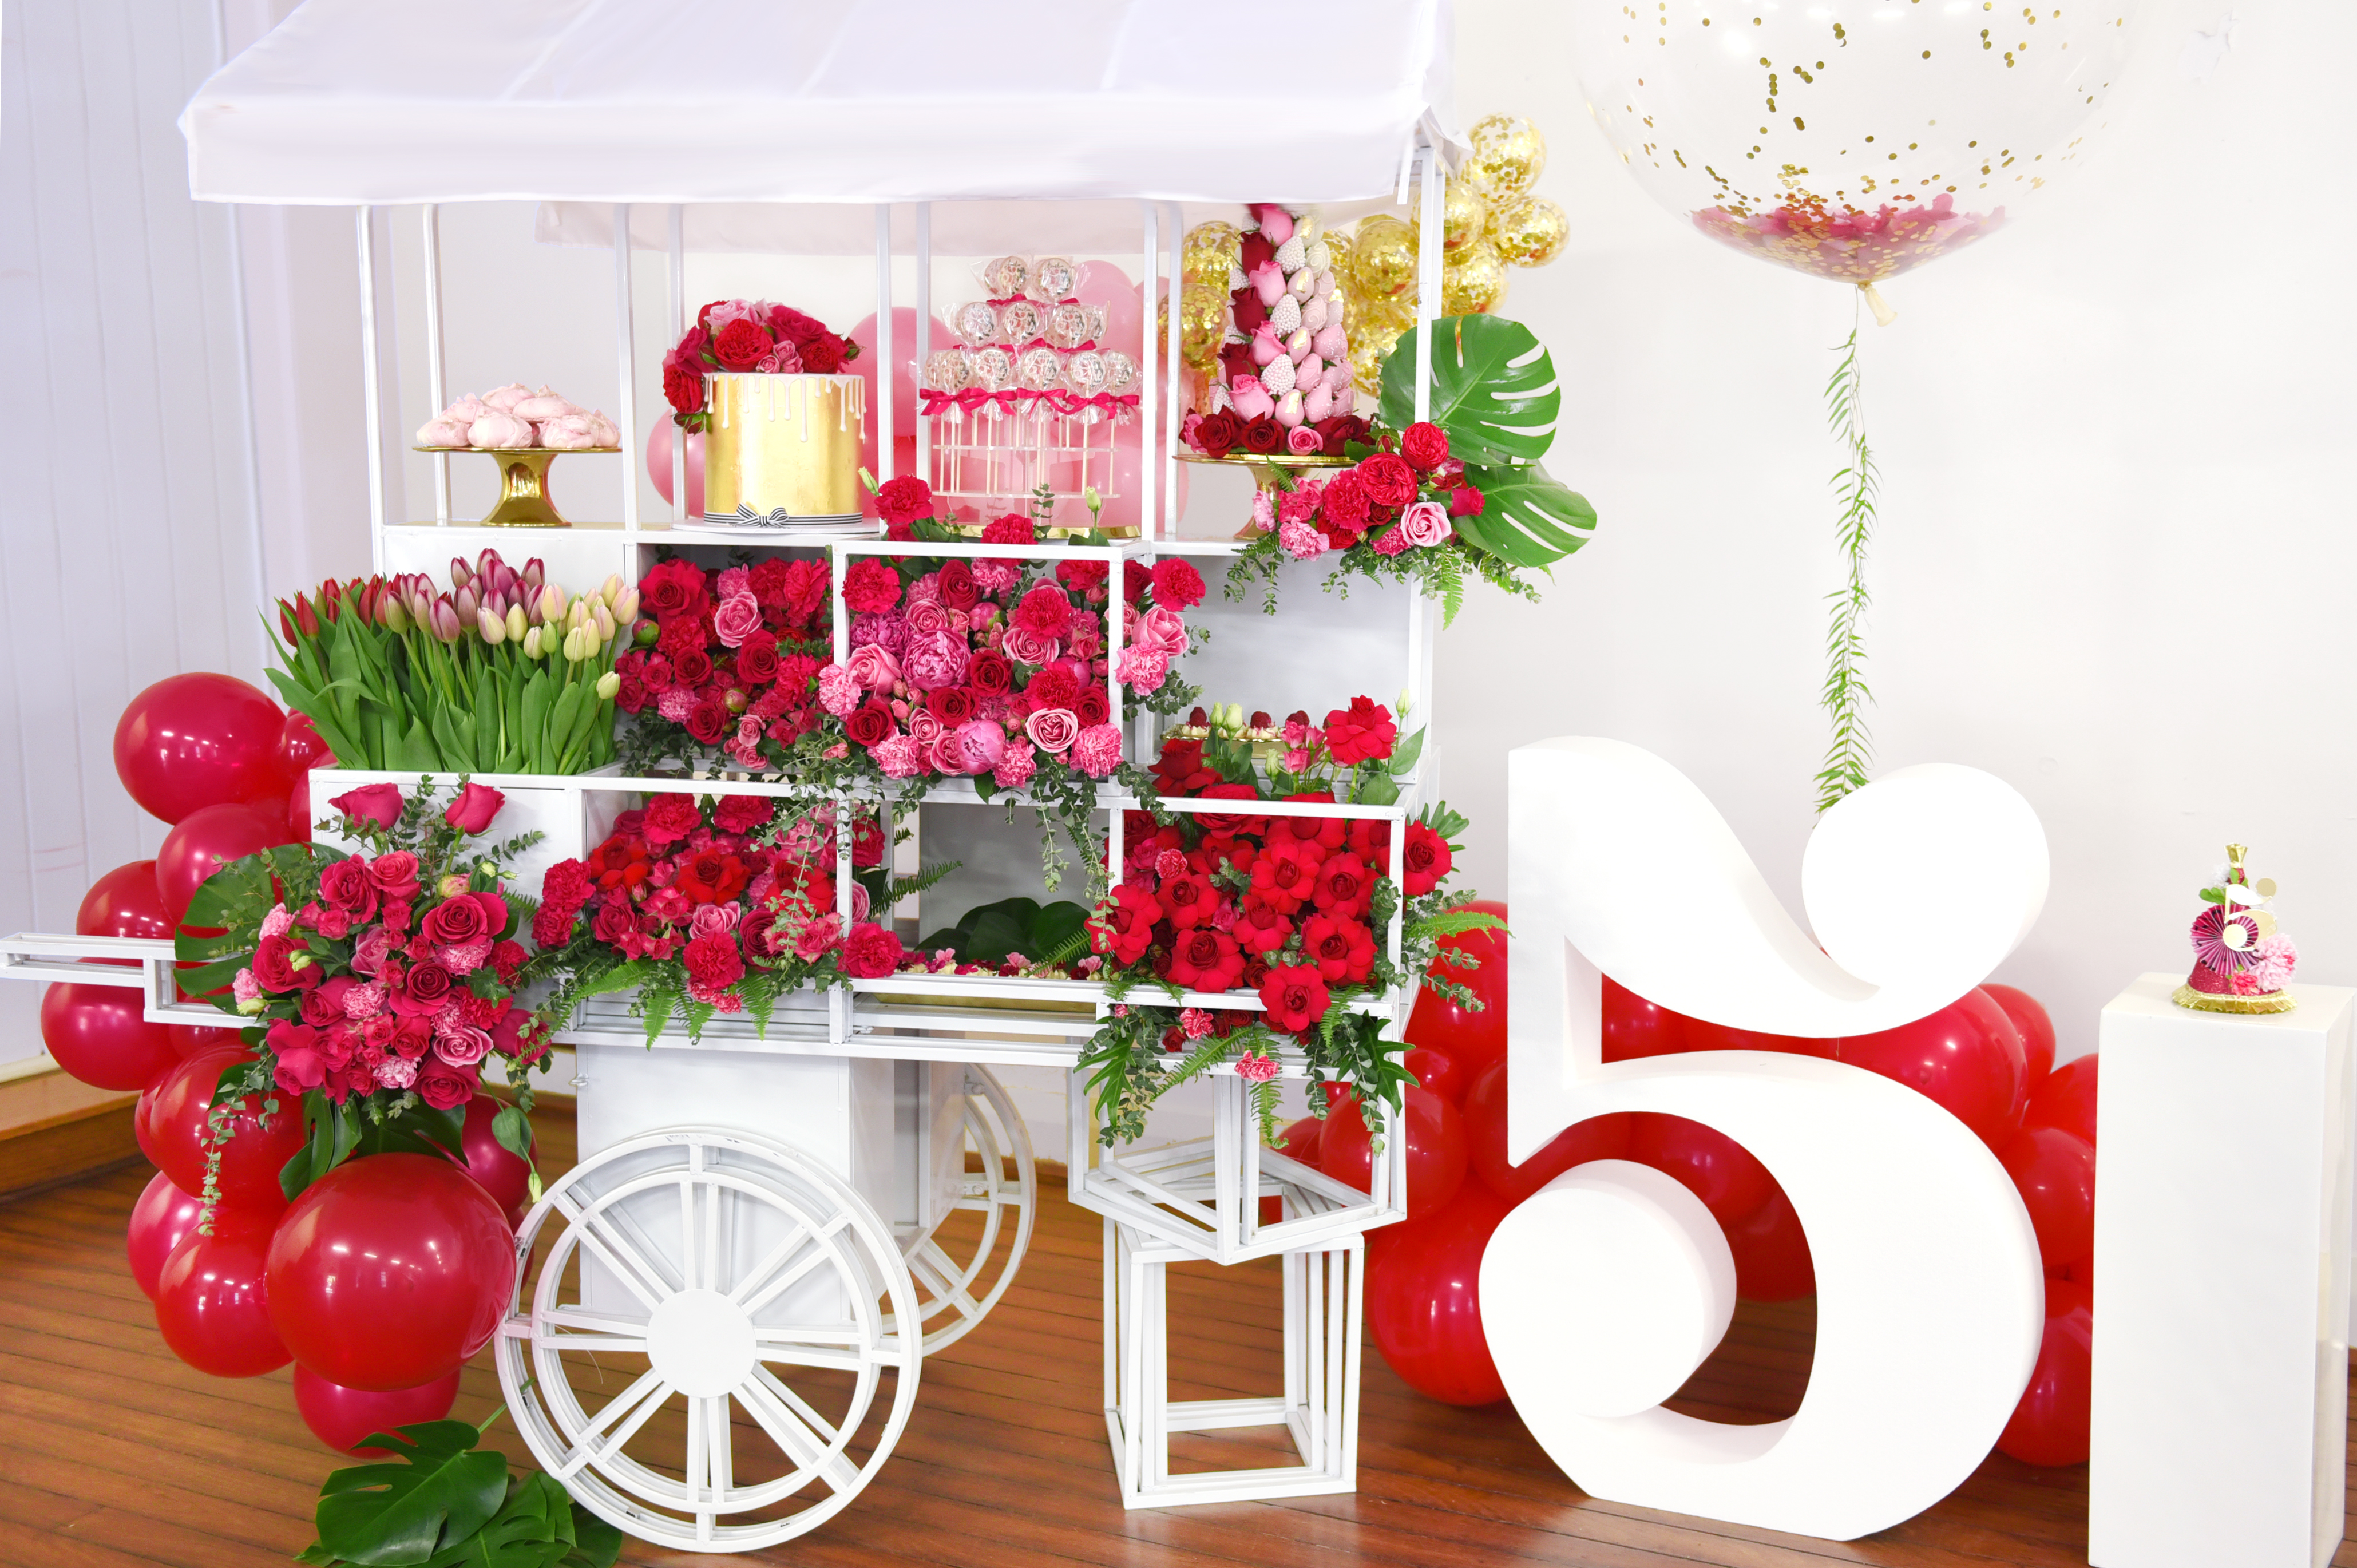 Chanel cart with balloons, flowers and desserts